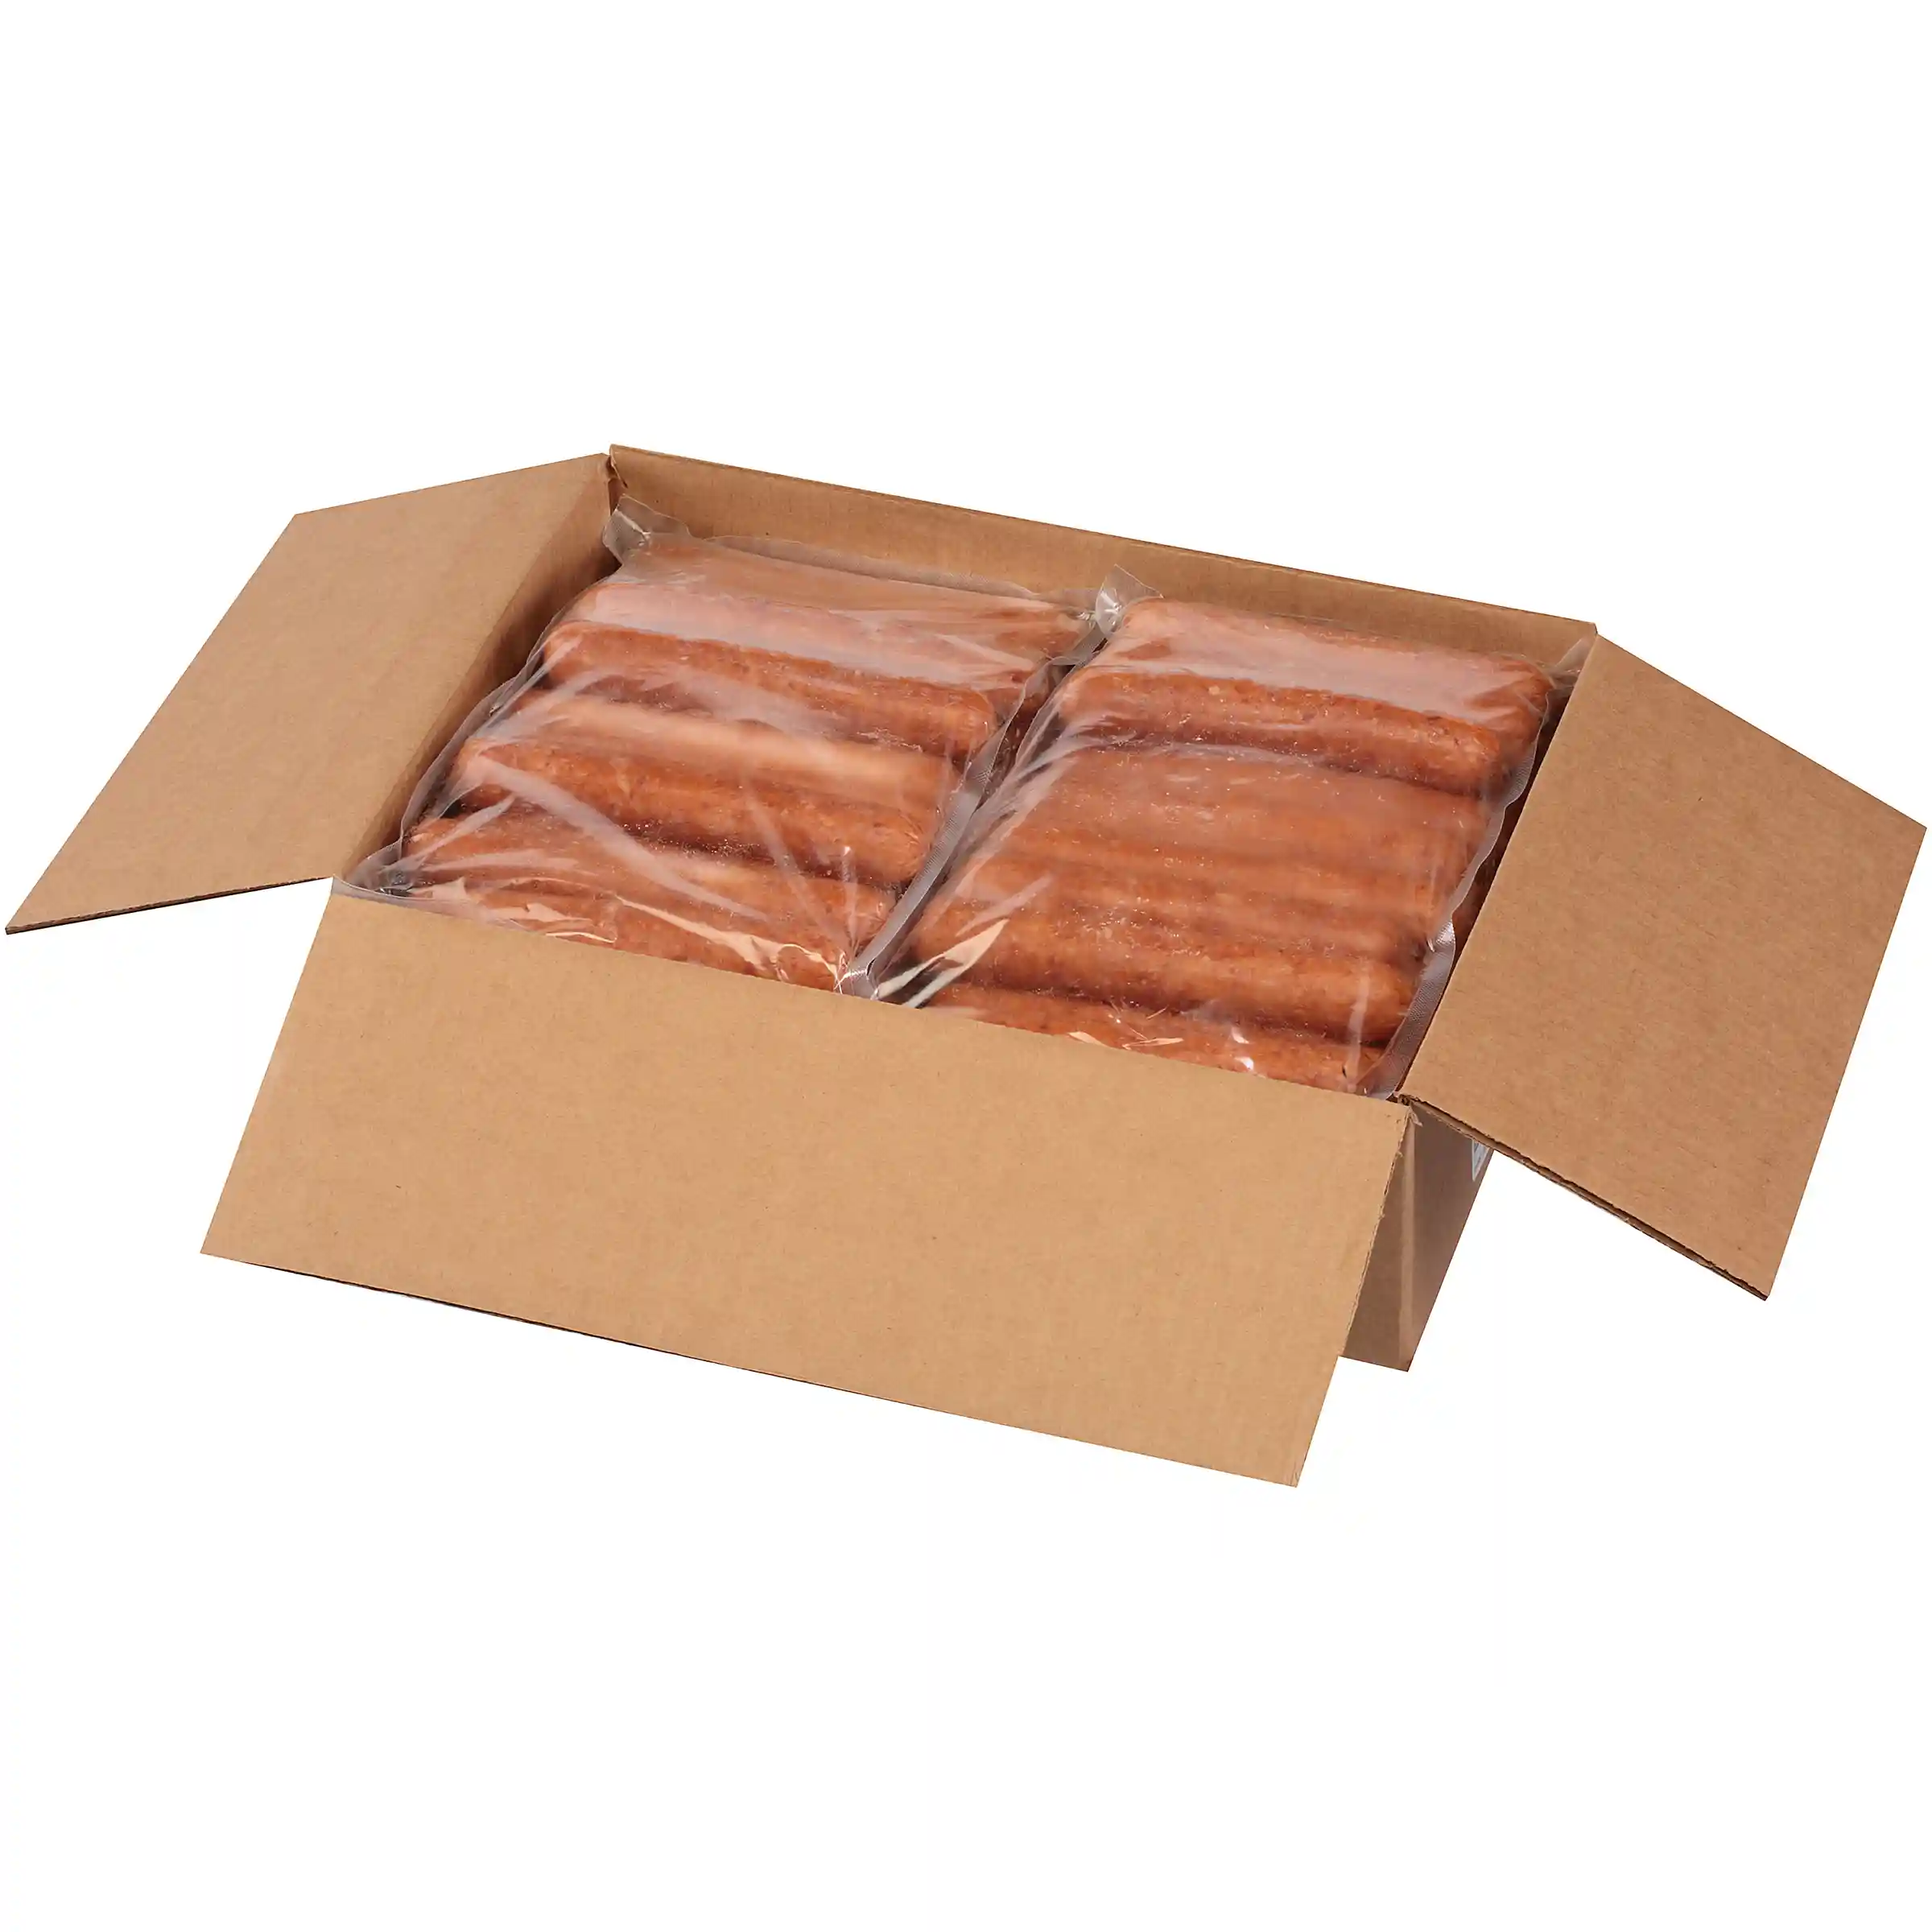 Hillshire Farm® Fully Cooked Skinless Polish Sausage Links, 5:1 Links Per Lb, 6.75 Inch, 12 Lb_image_31